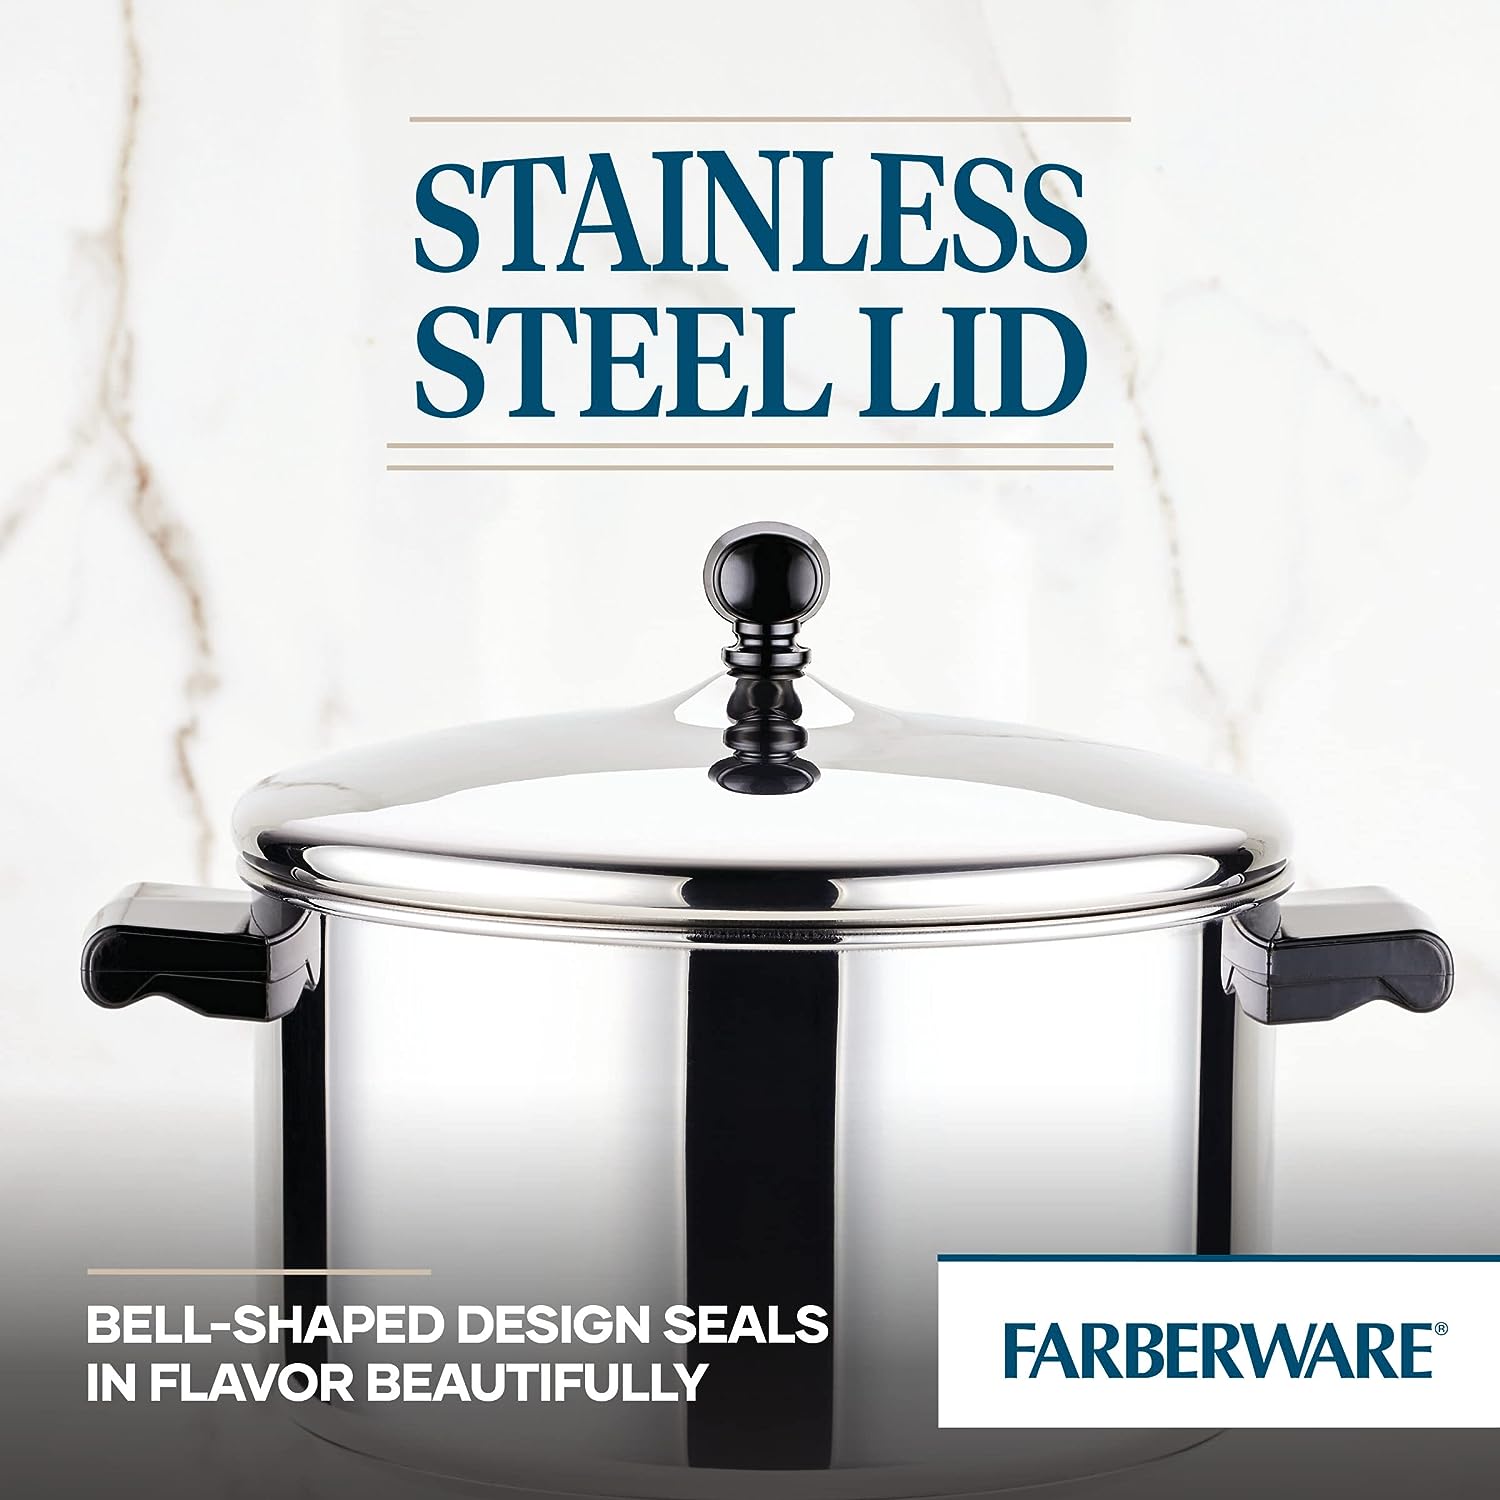 Farberware Classic Stainless Steel 6-Quart Stockpot with Lid